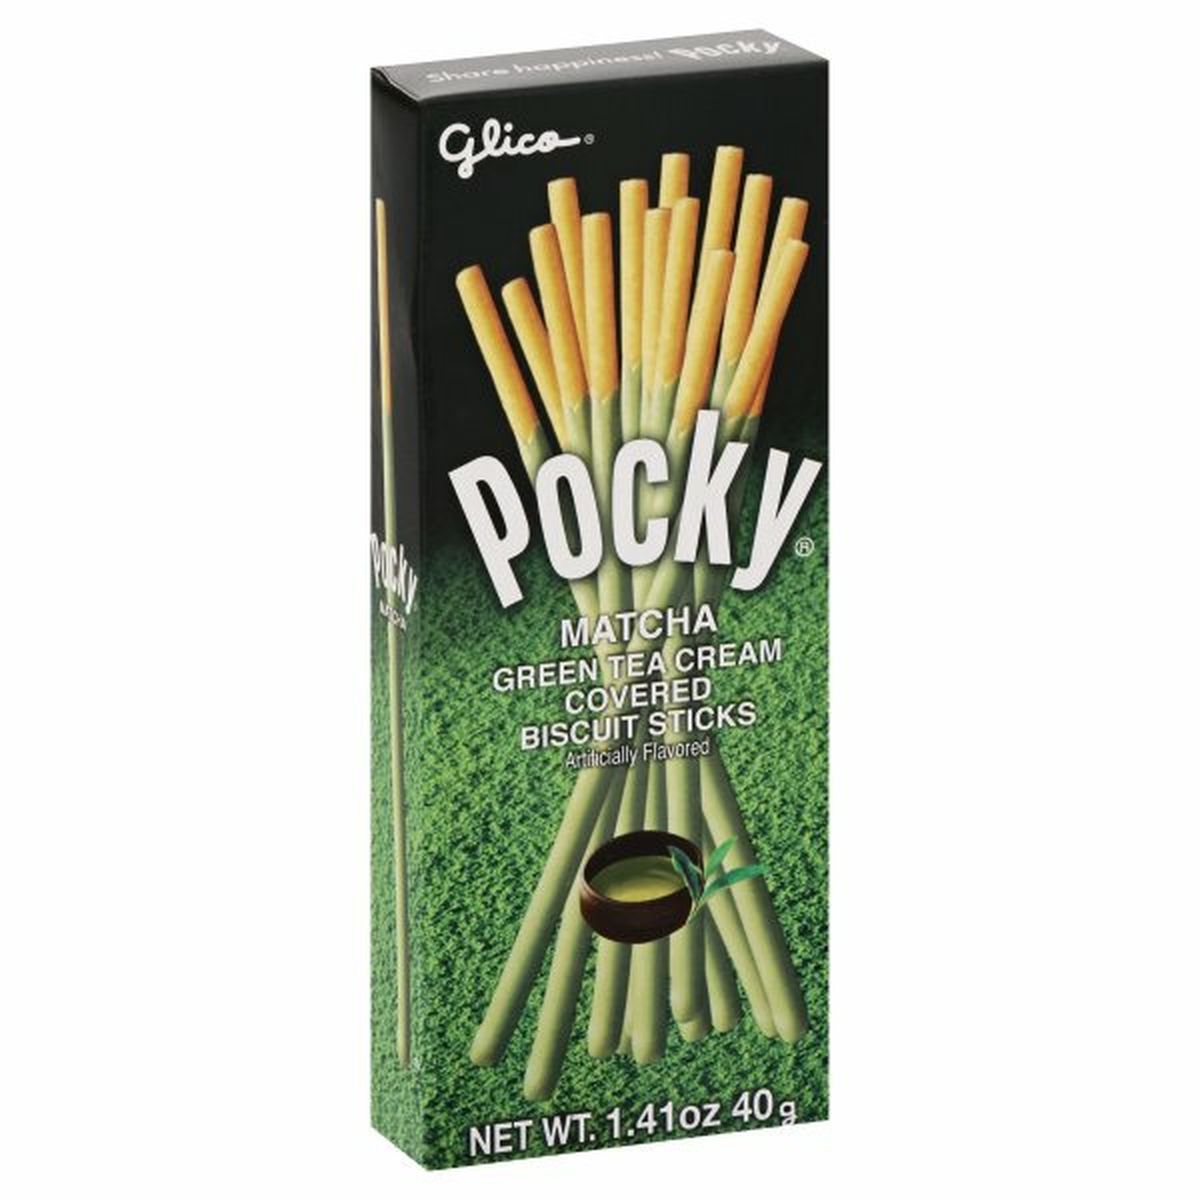 Calories in Pocky Covered Biscuit Sticks, Matcha Green Tea Cream